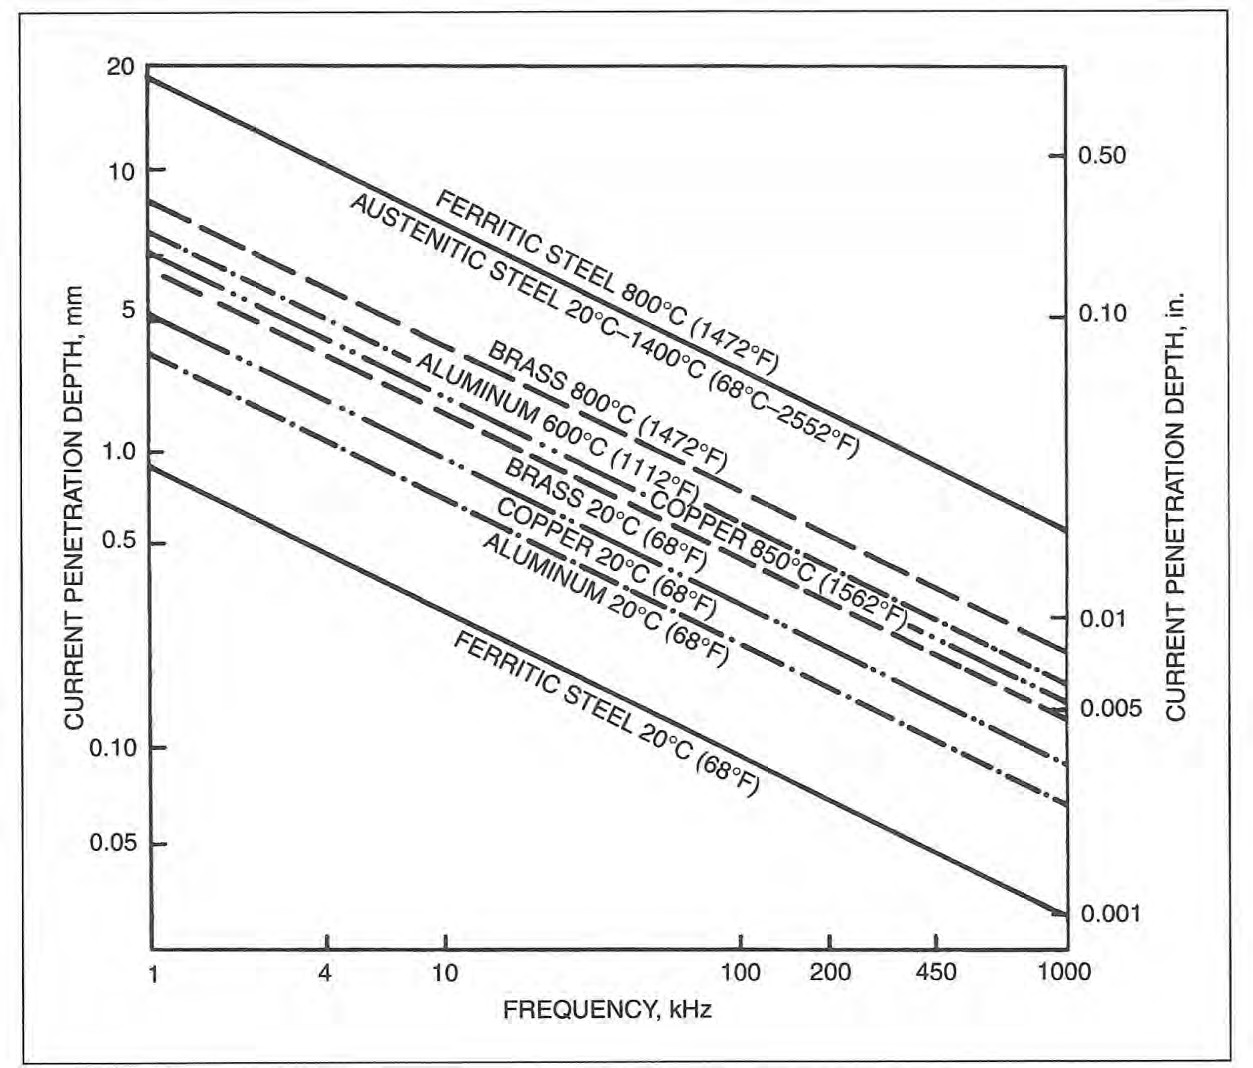 Figure 2:  Effect of frequency on depth of penetration into various metals at selected temperatures.